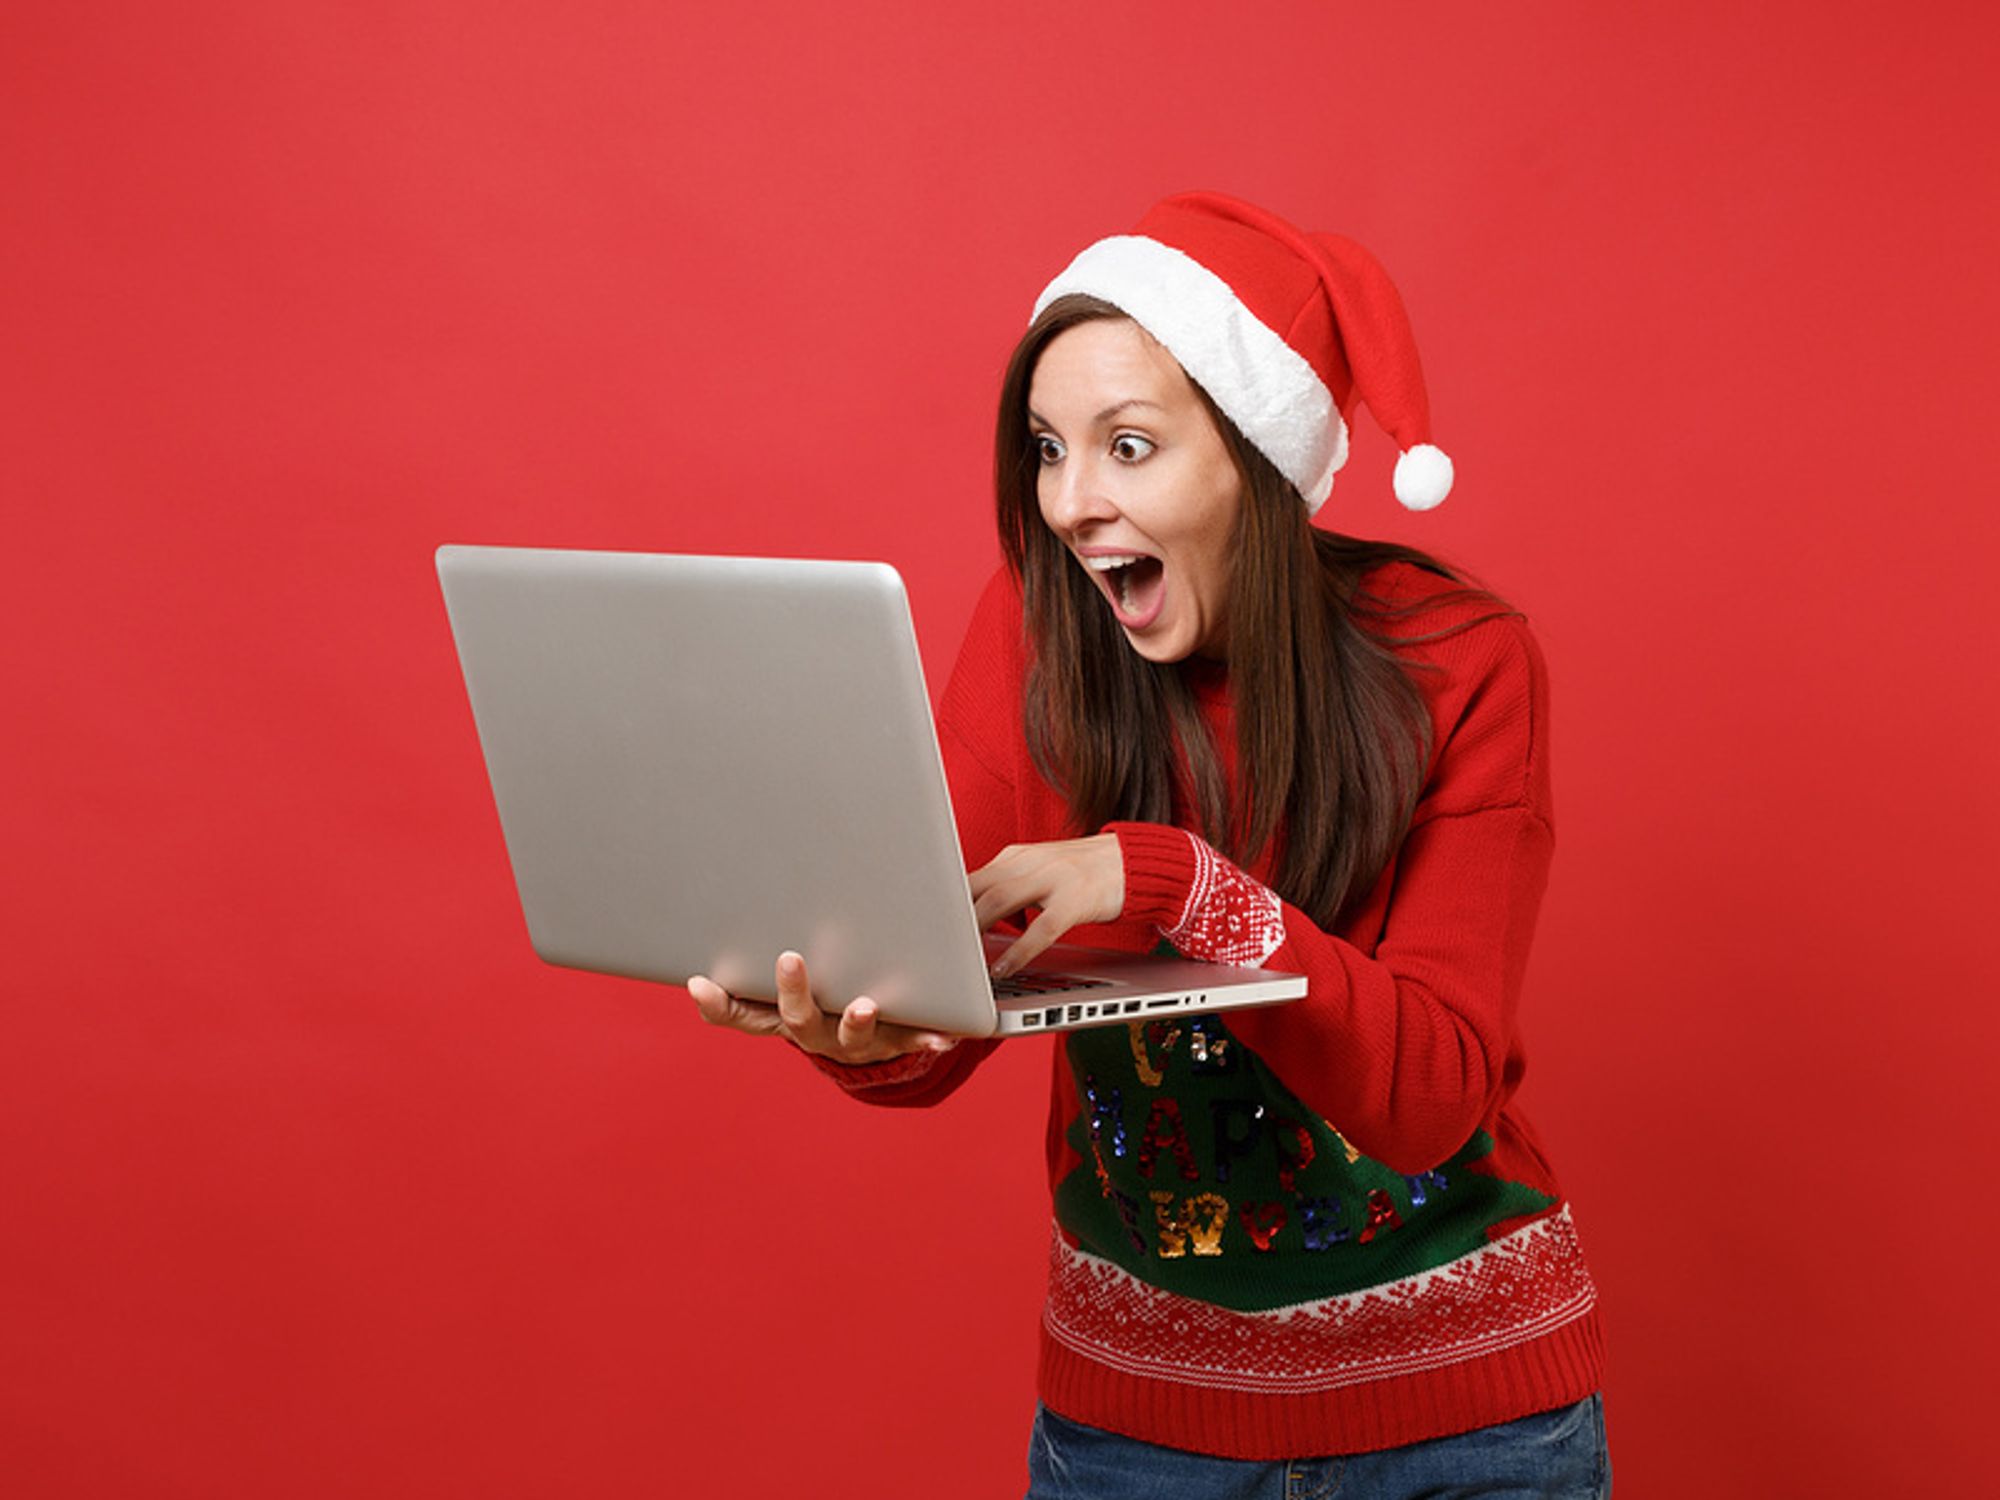 Woman continues her job search through the holiday season